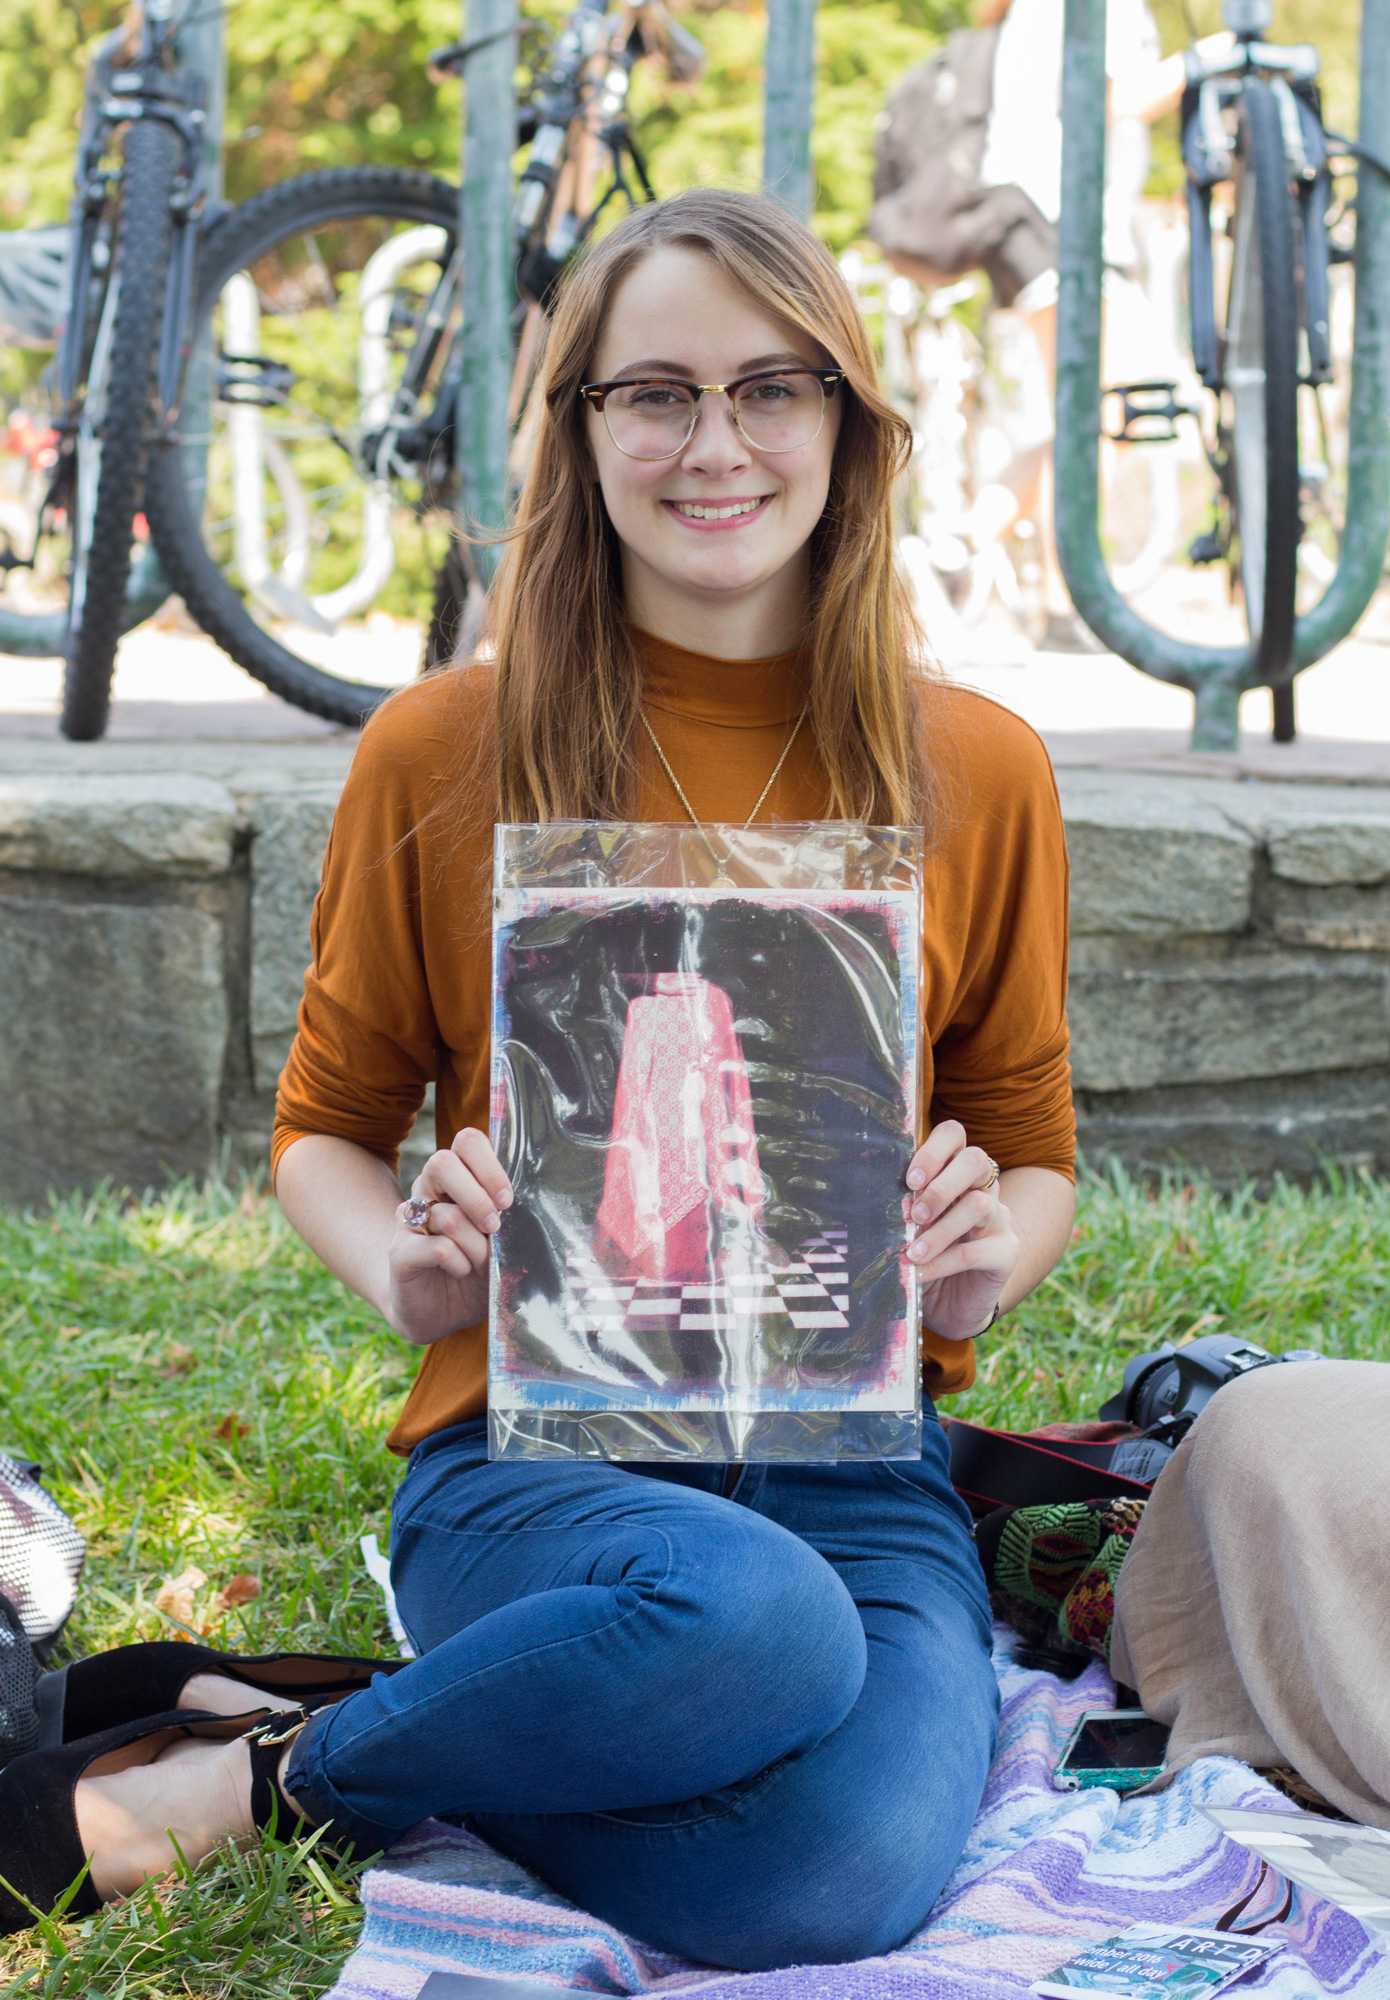 Katelyn Cartwright, Shauna Caldwells friend and participant in the art drop is holding a piece of artwork she found under a stairwell on campus.